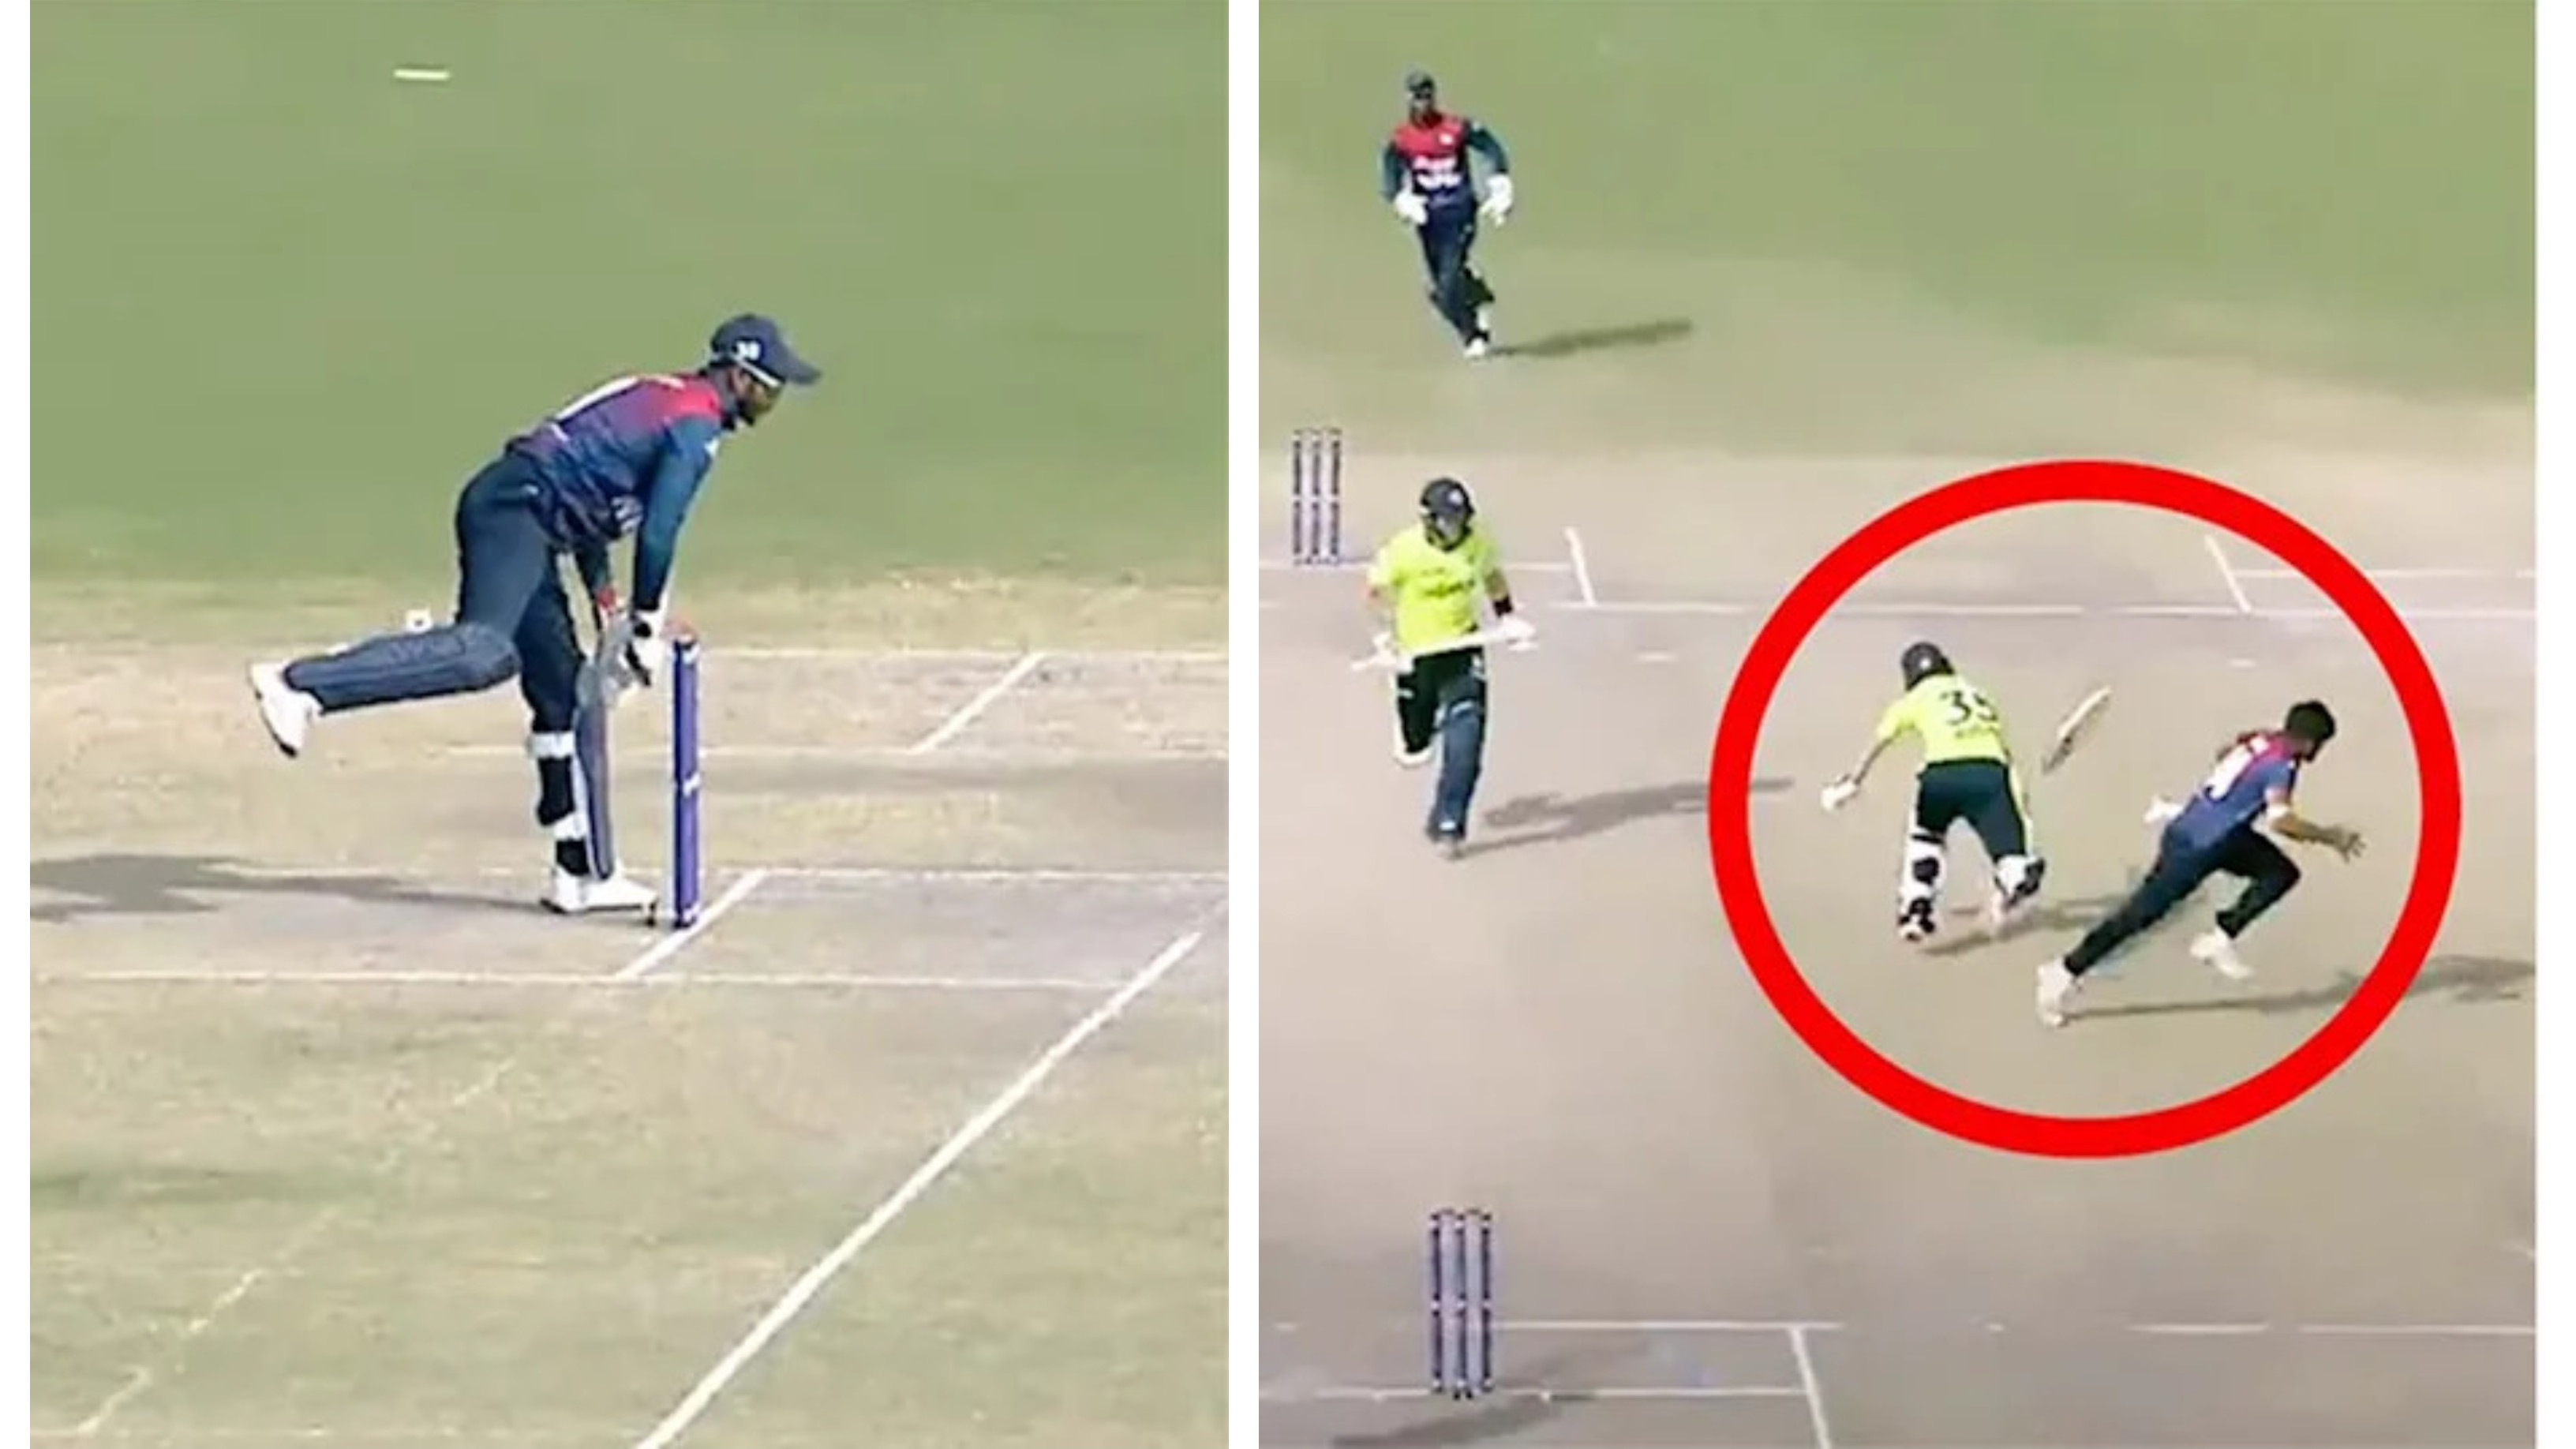 WATCH: Nepal wicketkeeper Aasif Sheikh refuses to run out as Ireland batter fell after colliding with bowler